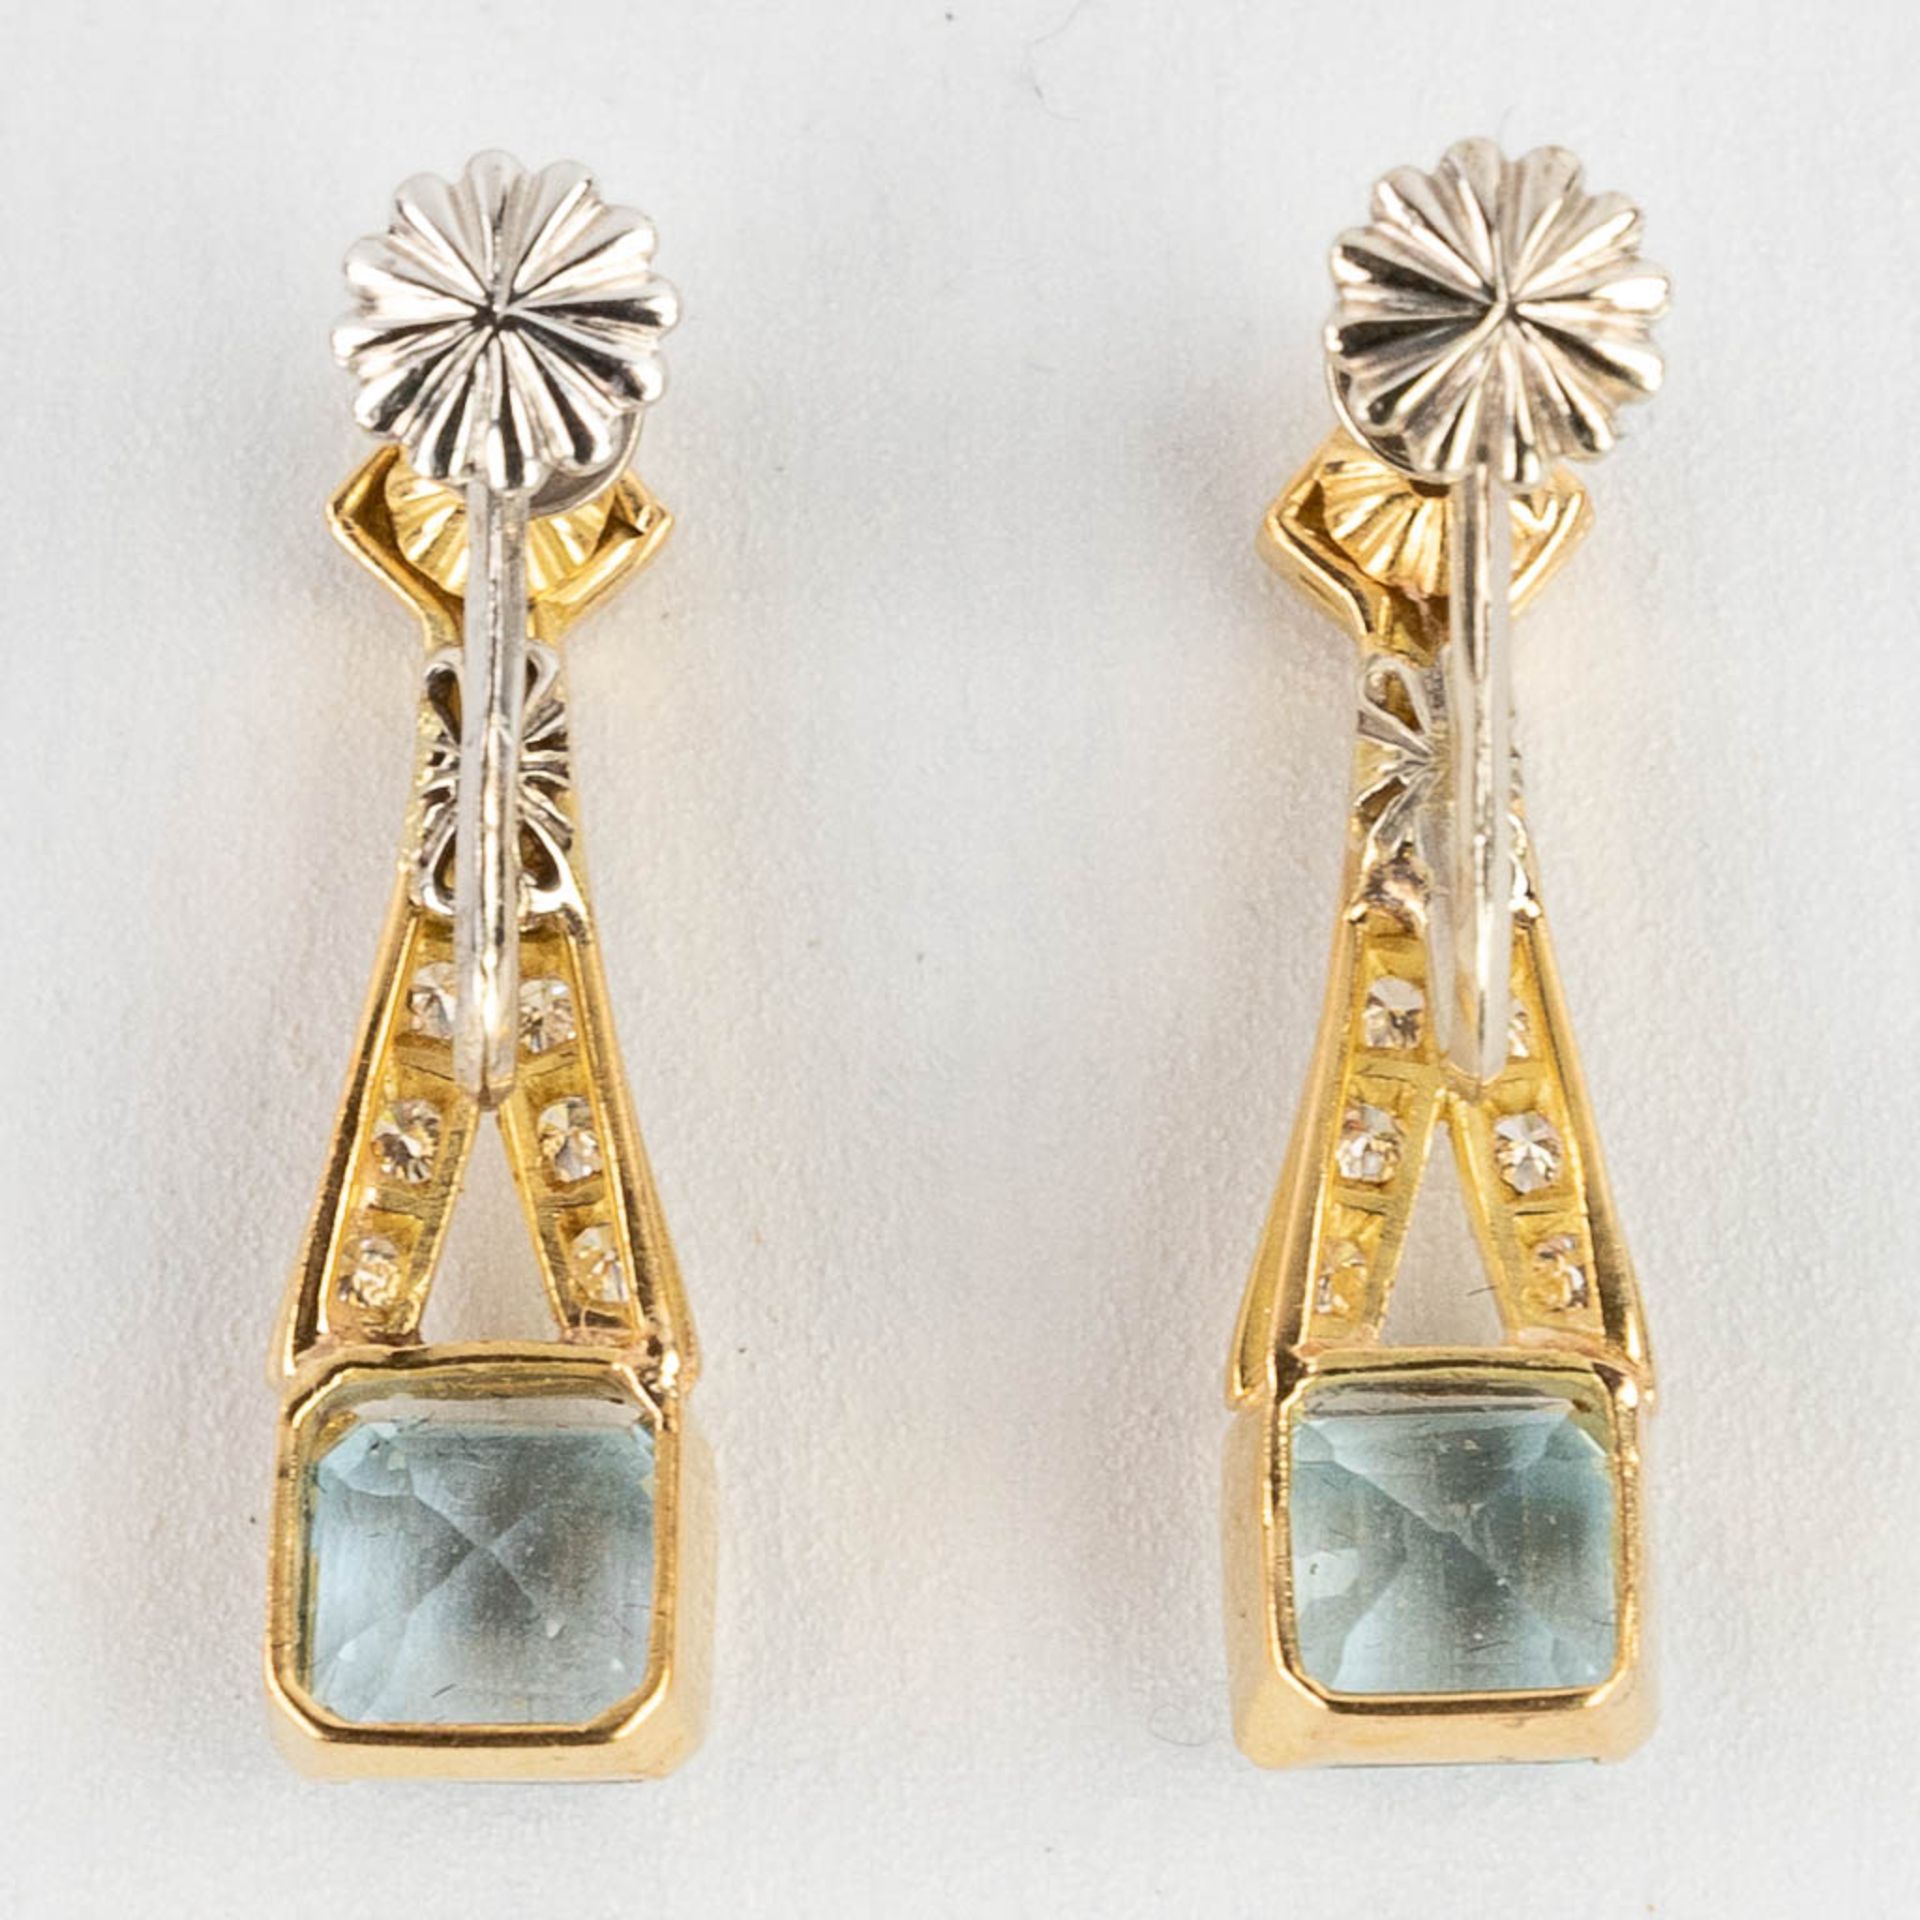 A necklace with two earrings, 18kt yellow gold Brilliants and Topaz/Aquamarine, 26,77g. - Image 13 of 15